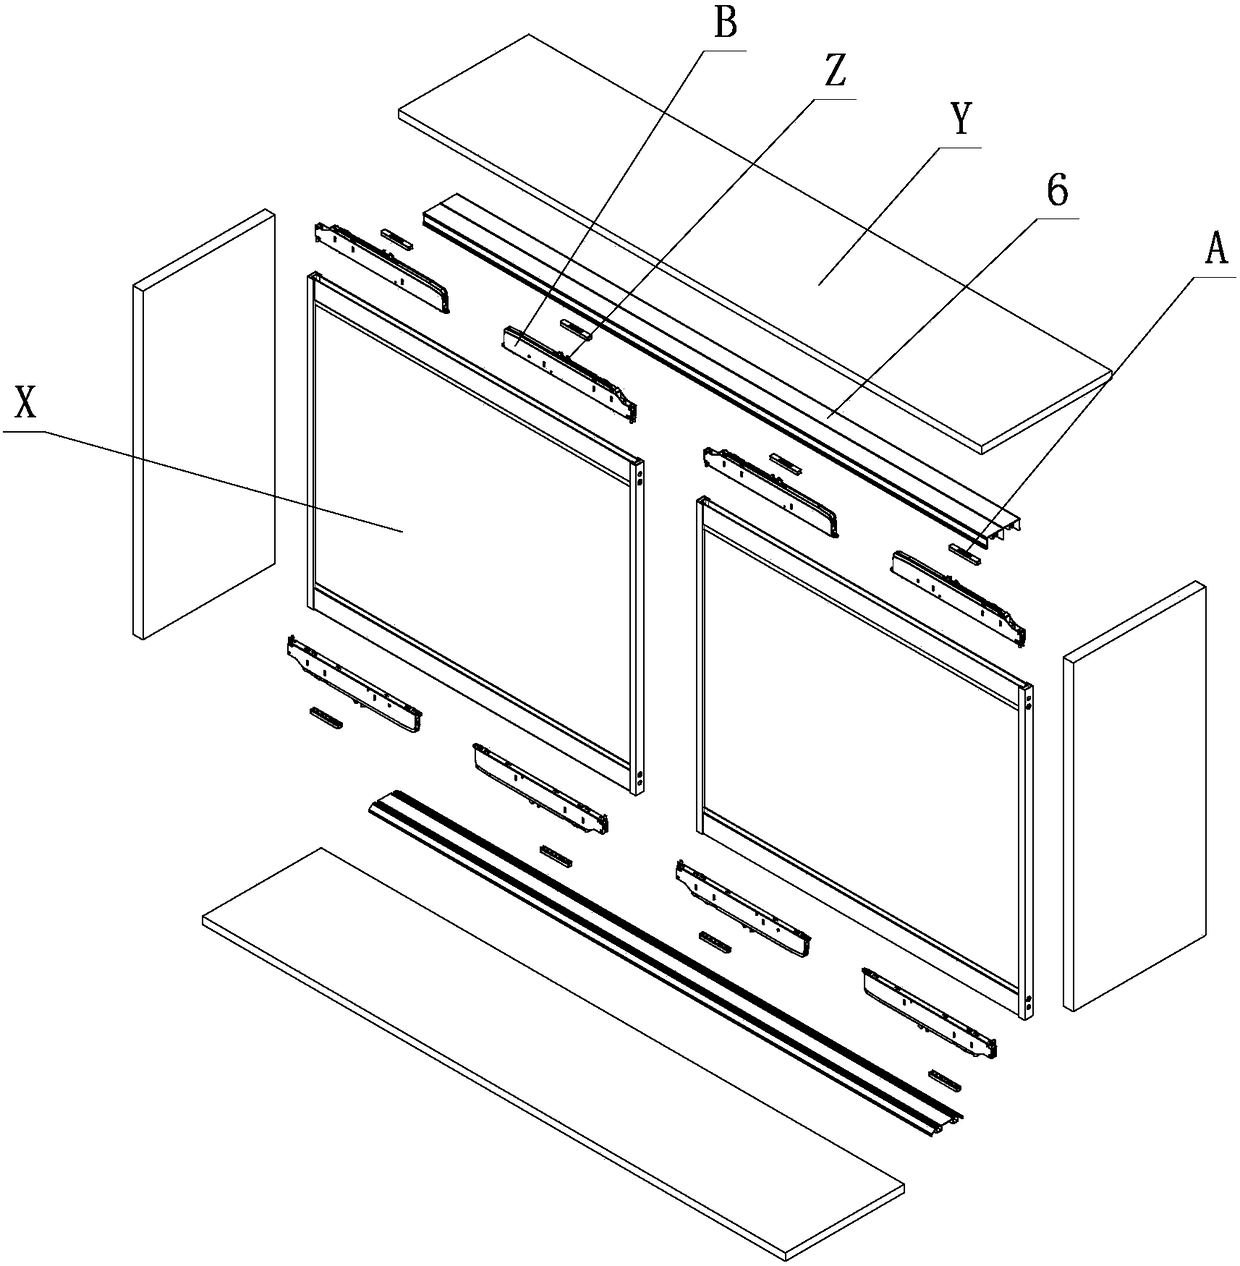 A pre-positioning mechanism for a furniture toggle device